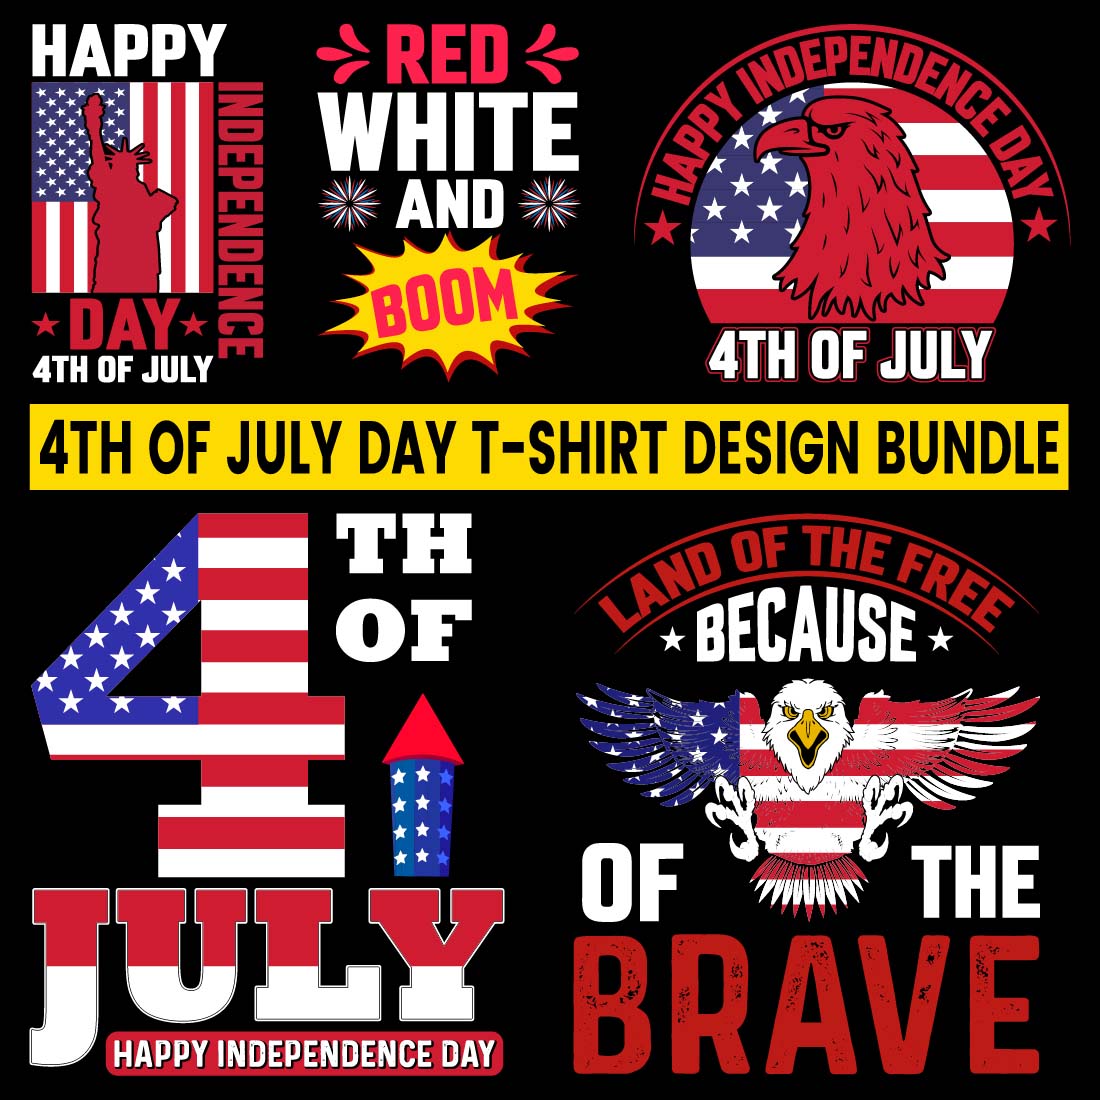 4th of July Best selling t shirt design bundle preview image.